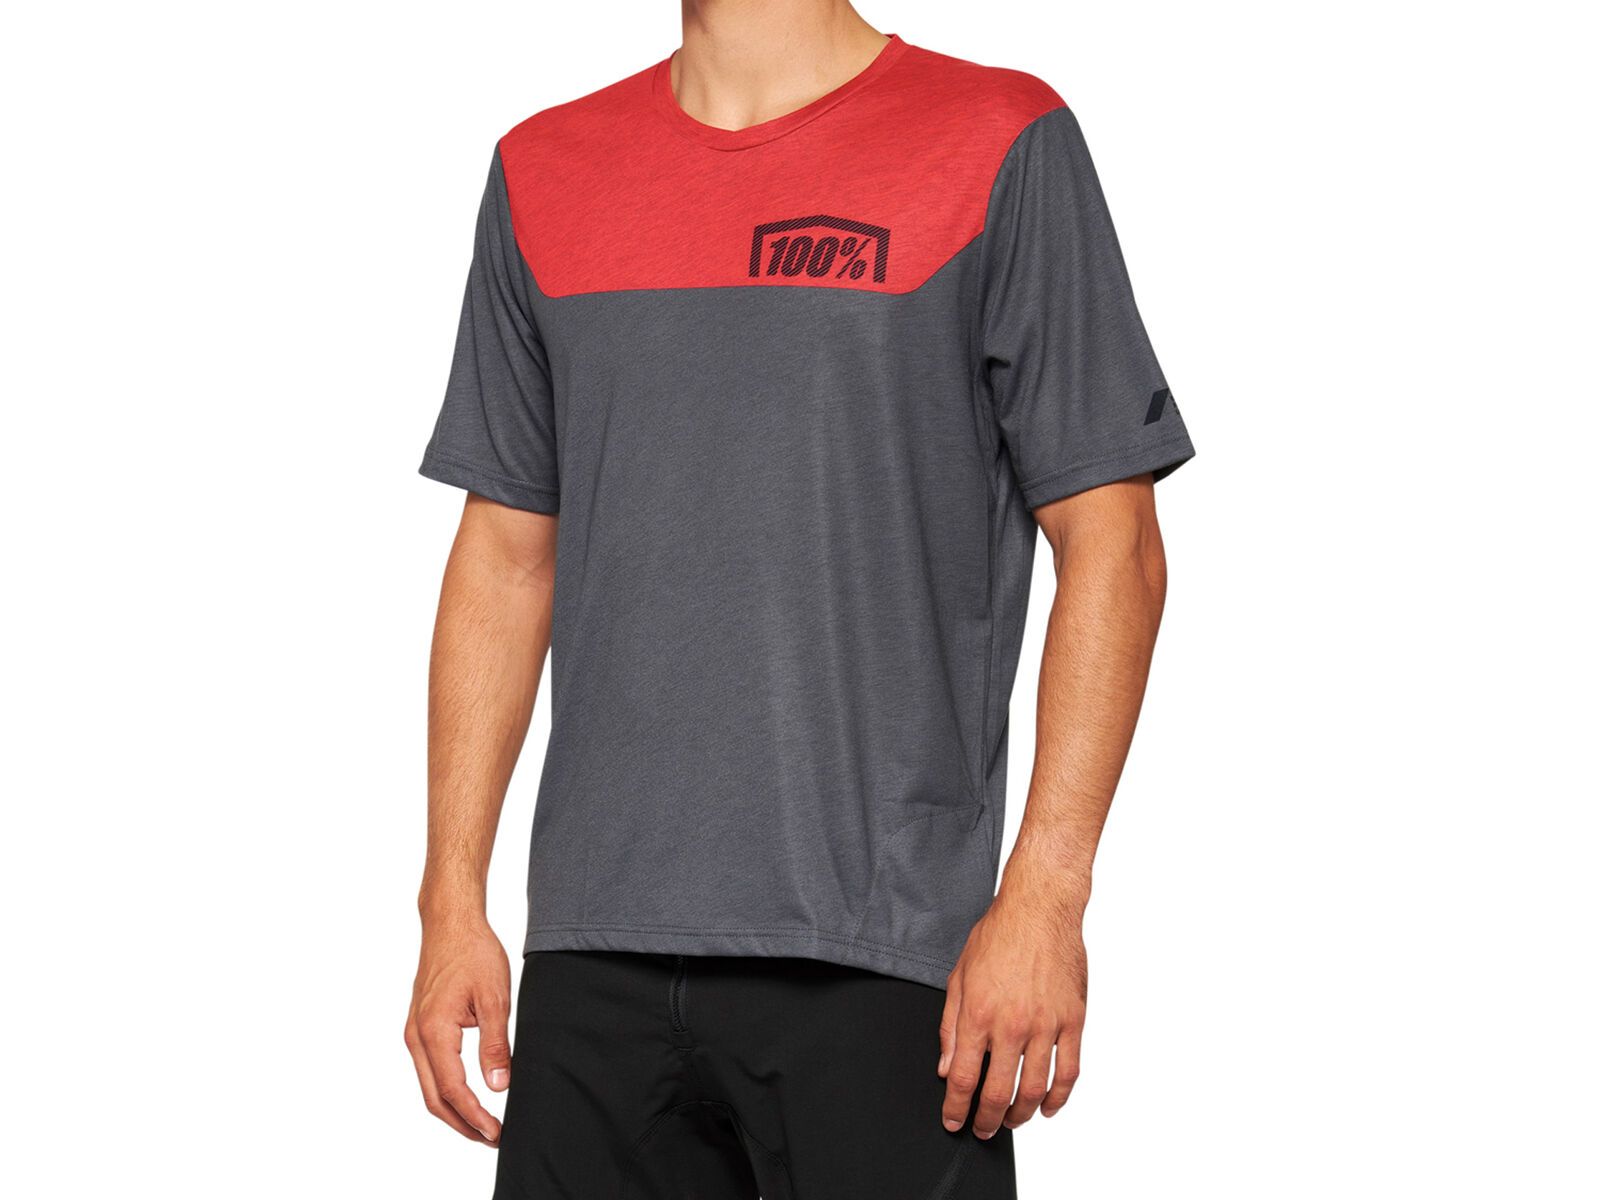 100% Airmatic Short Sleeve Jersey, charcoal/racer red | Bild 1